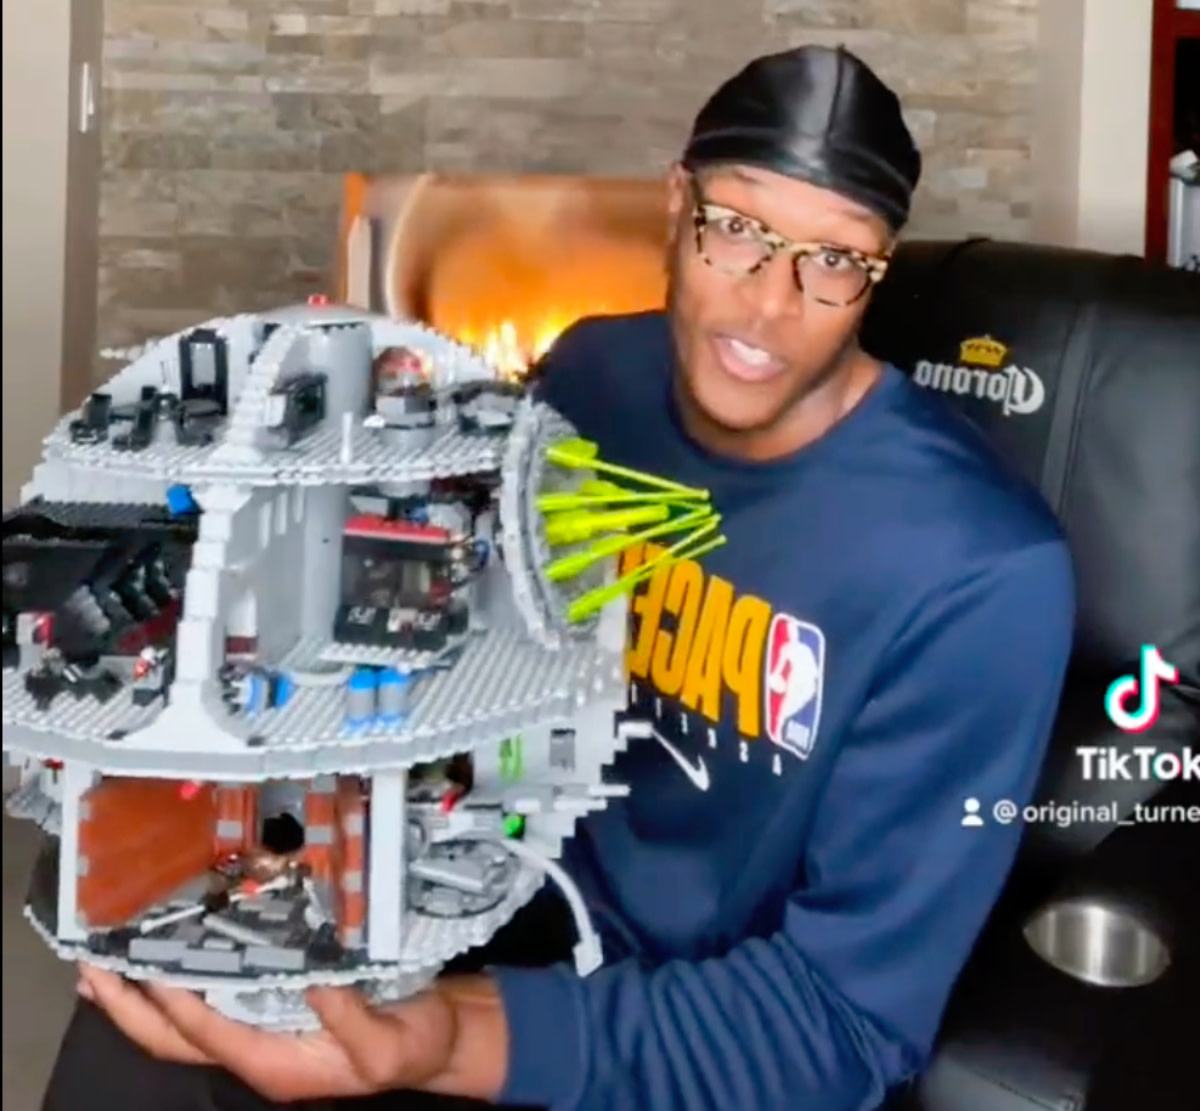 Myles Turner Shows Off His Incredible Lego Collection On TikTok: "Makes Sense That He Always Leads The League In Blocks."